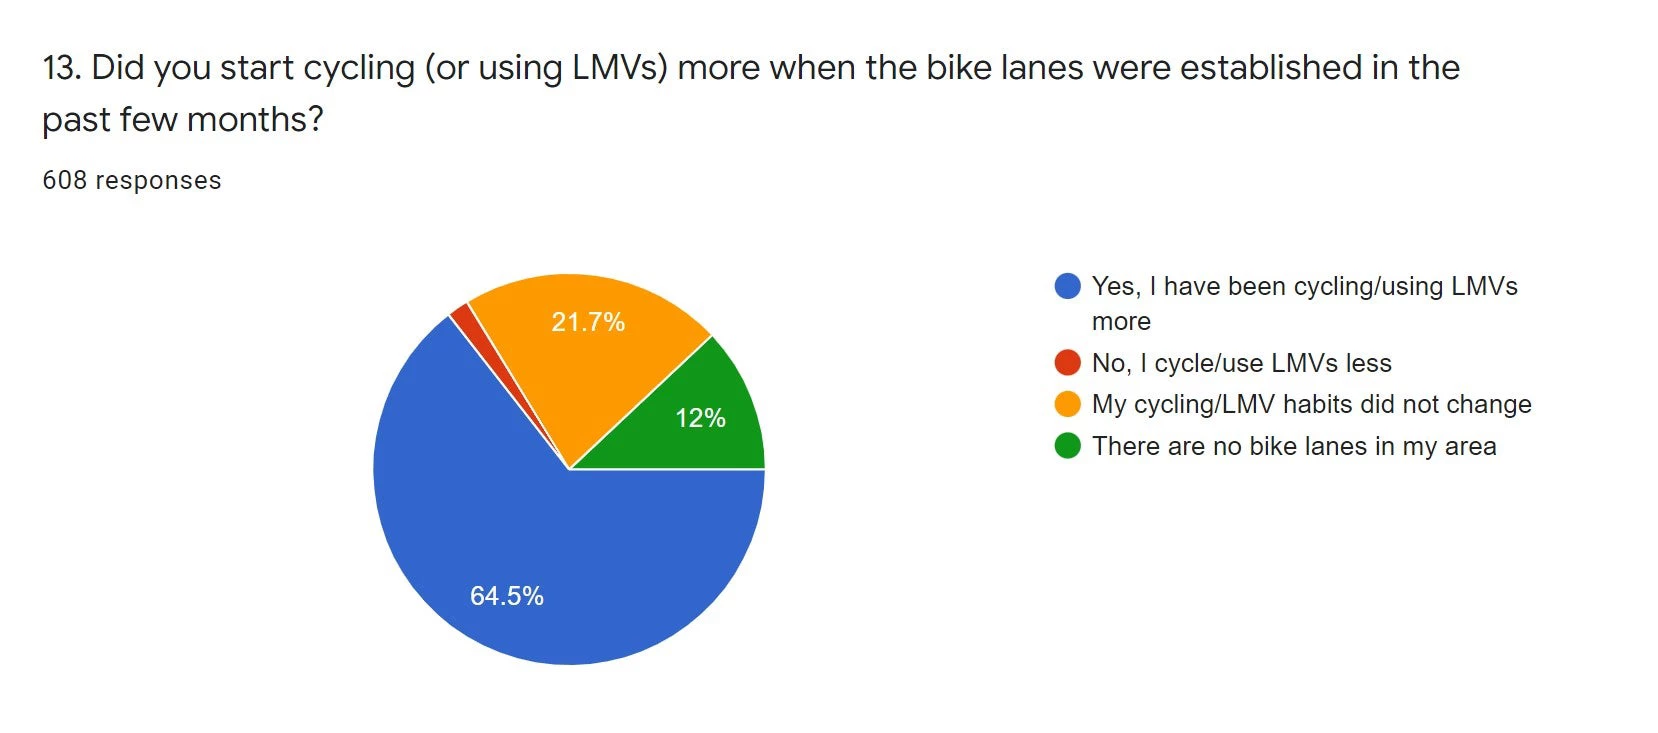 Almost 65% of respondents from a post-construction survey said that they used active transport and light mobility vehicles (LMVs) more once the cycling infrastructure was introduced.